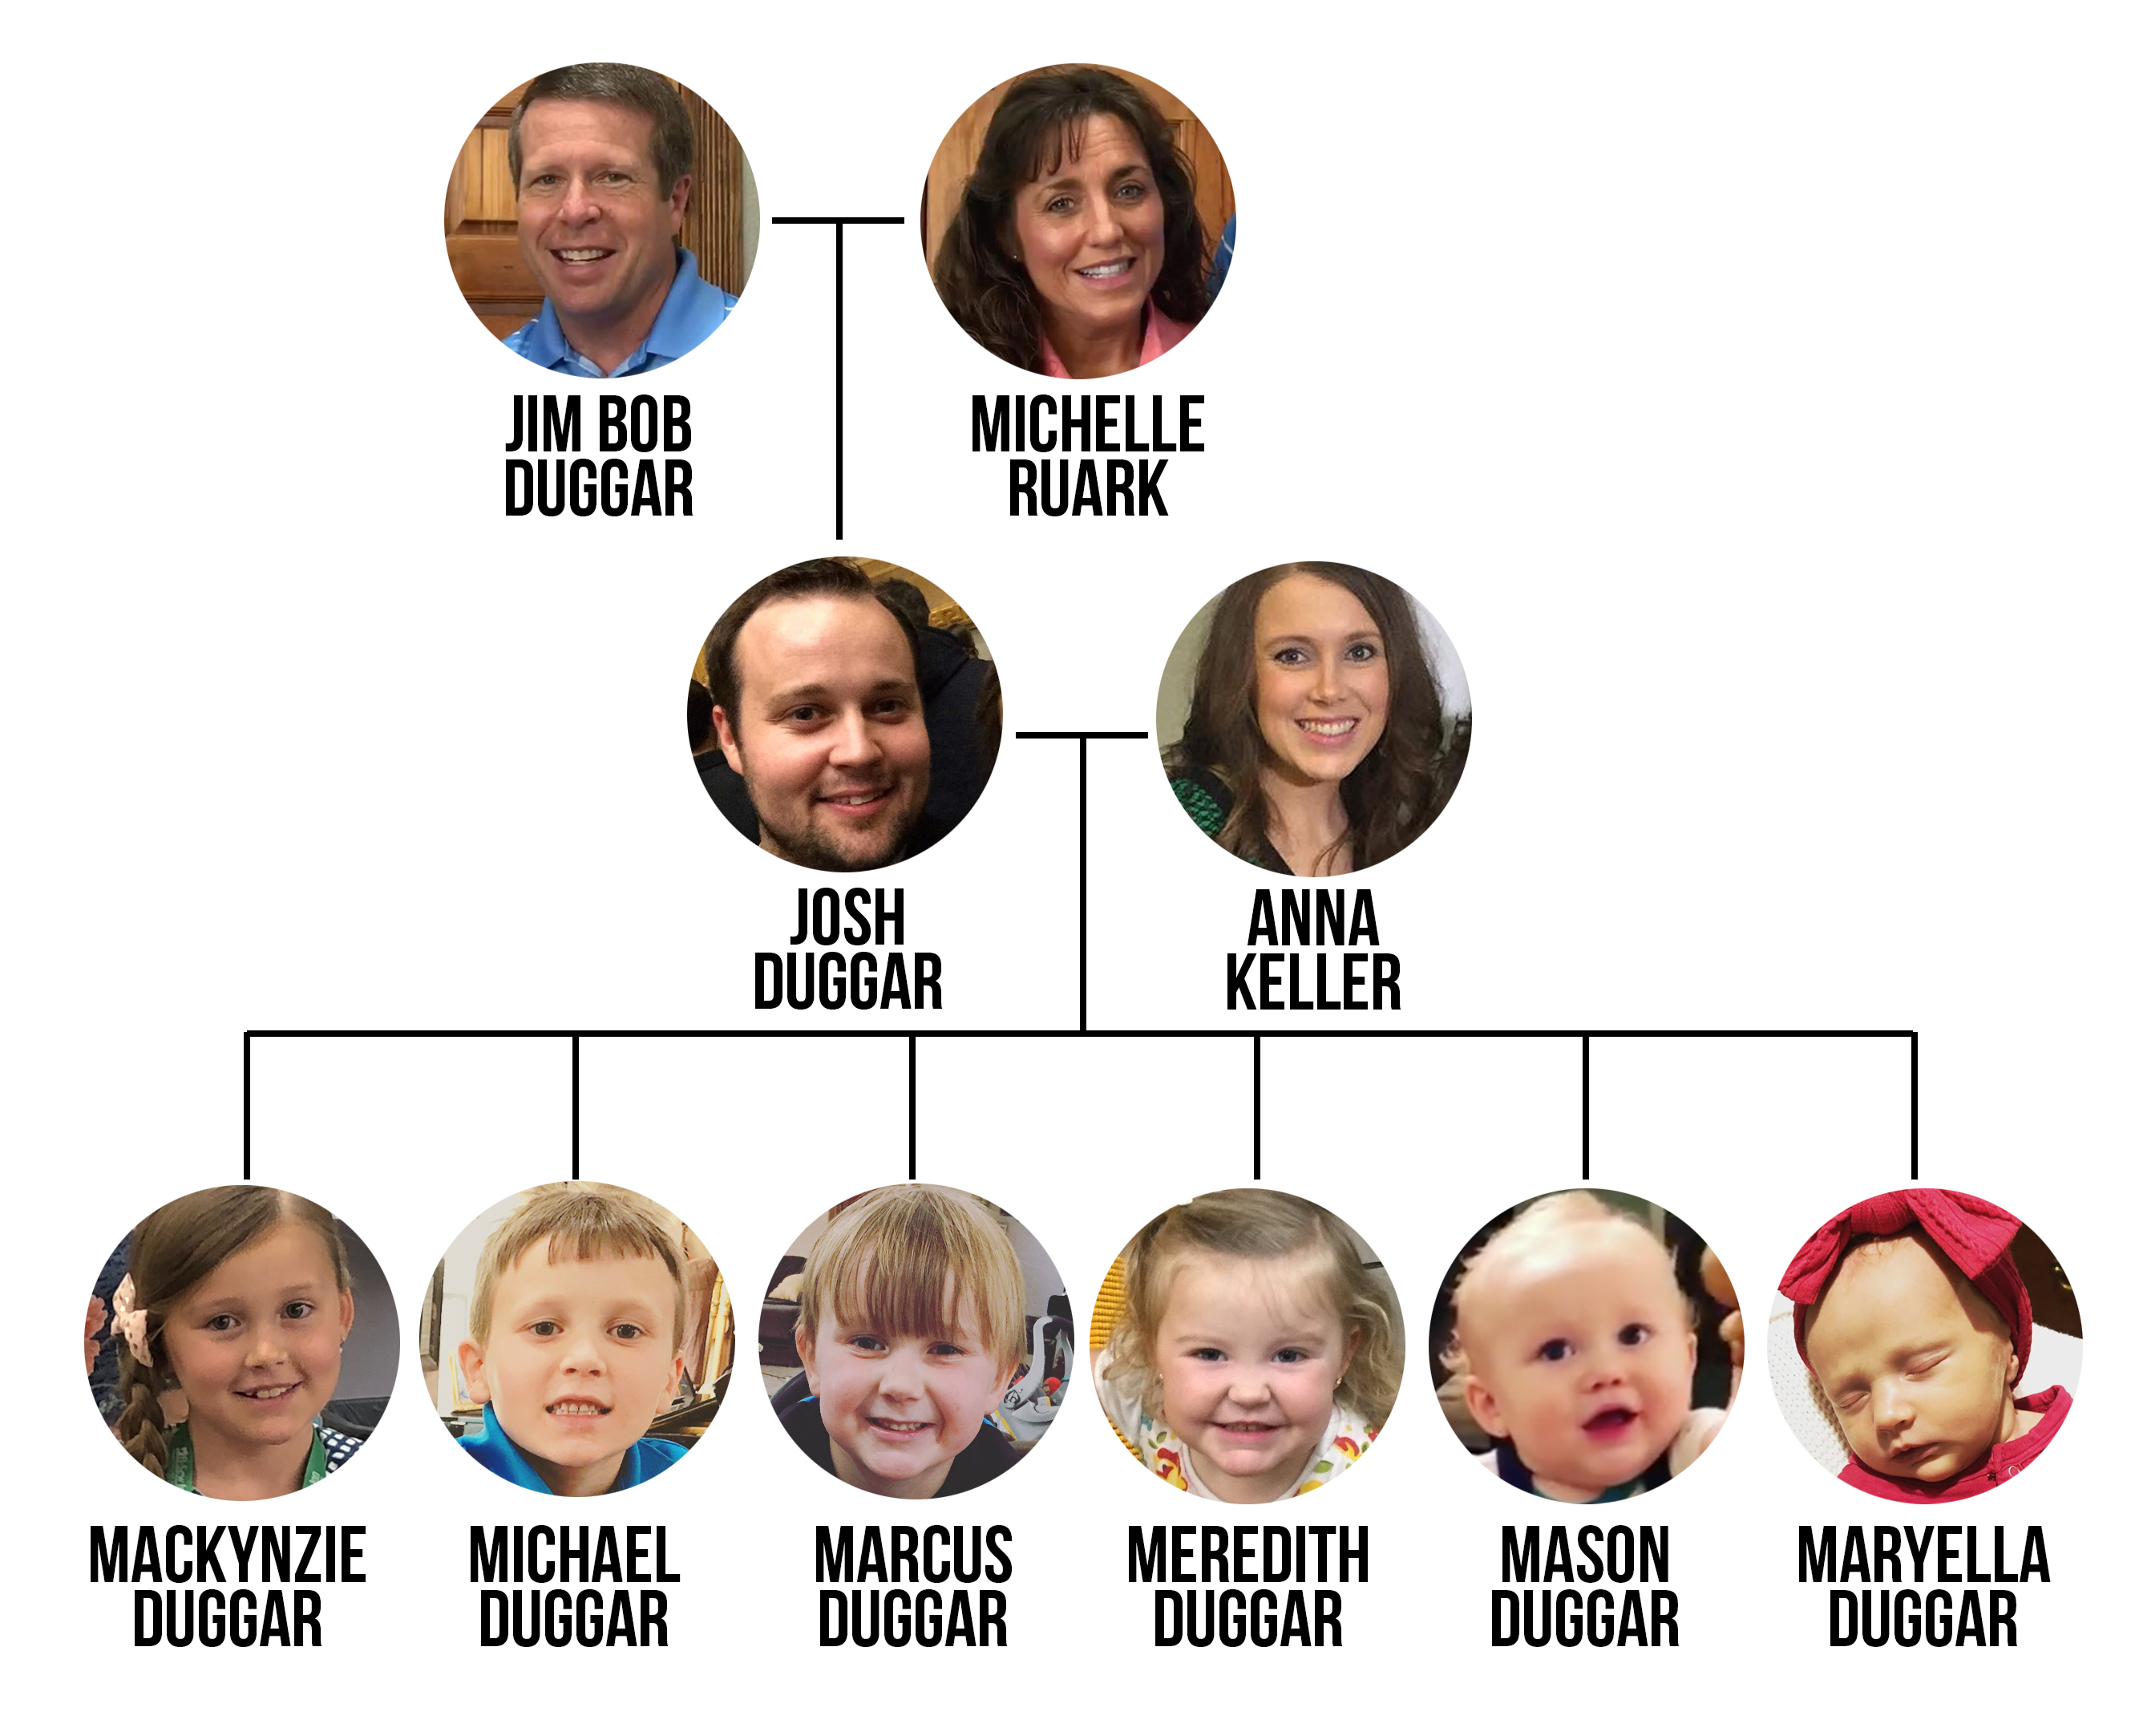 Duggar Family Tree The Ultimate Visual Guide to the Famous Family